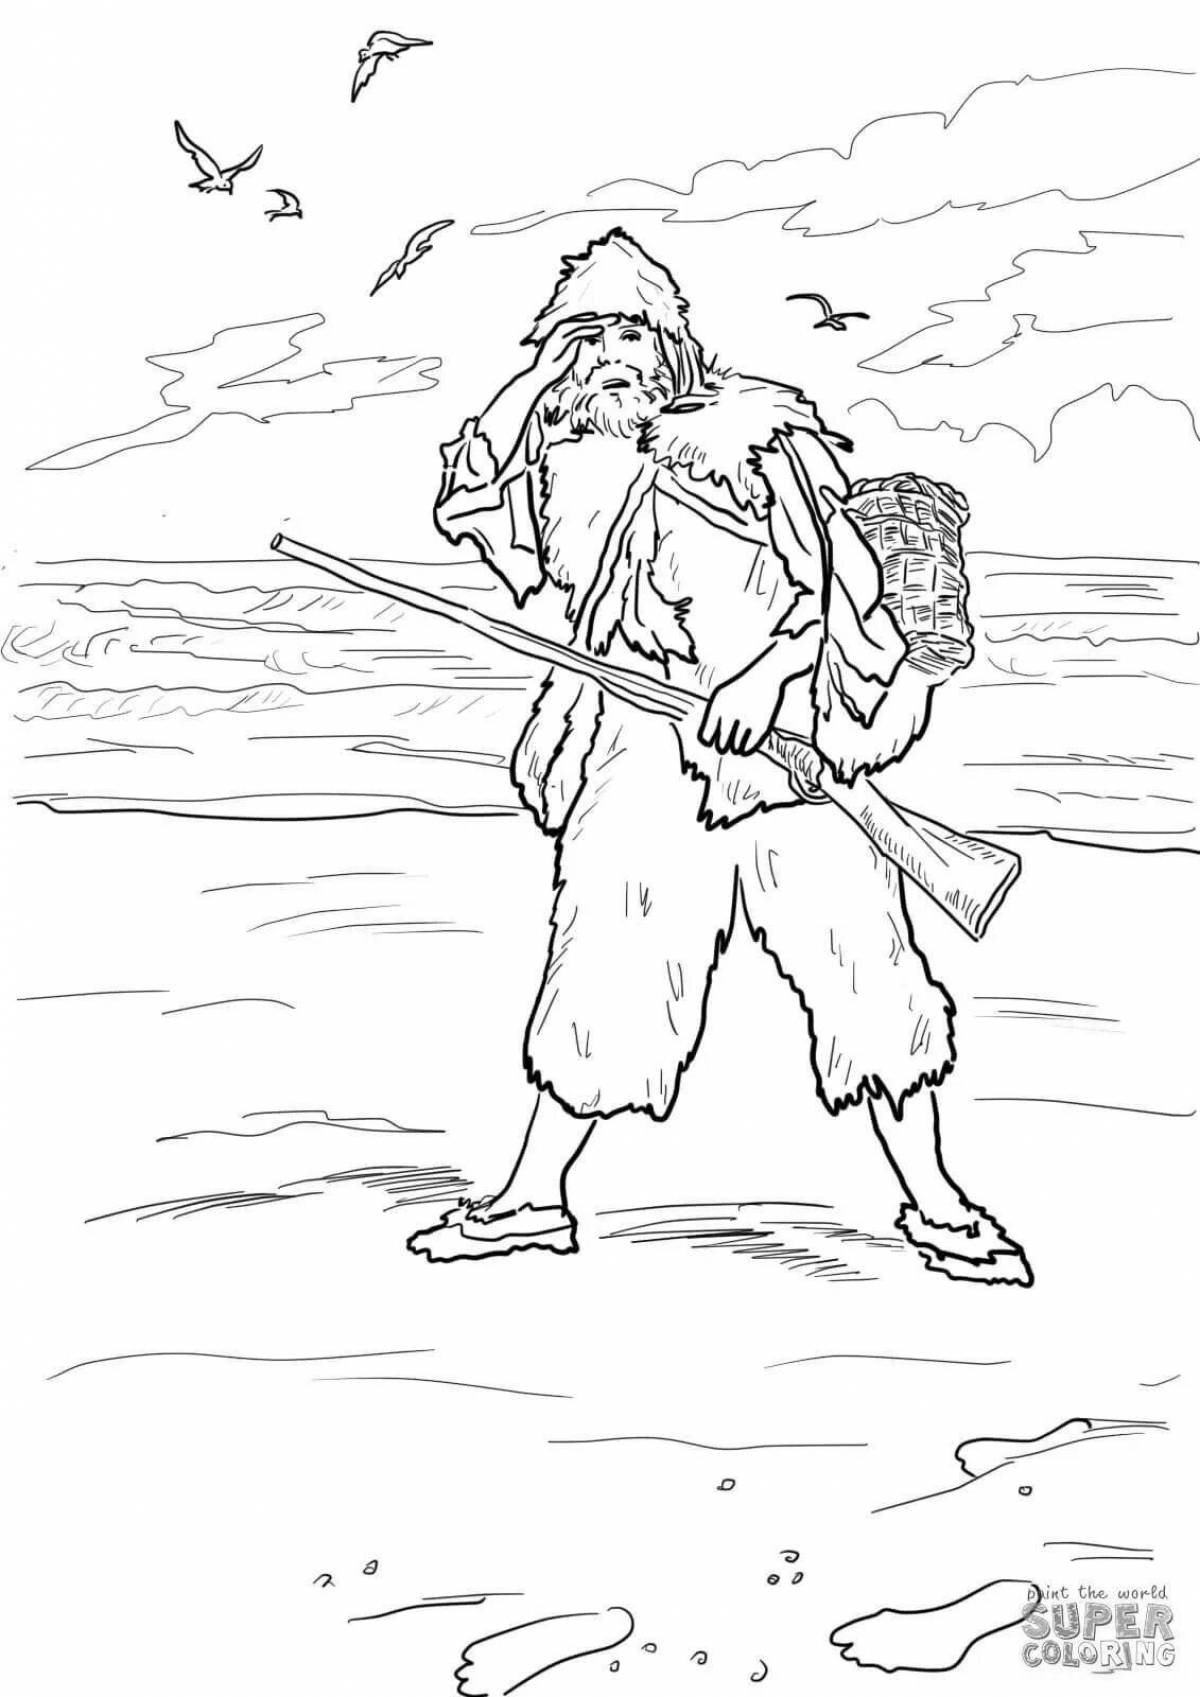 Colorful robinson crusoe coloring page